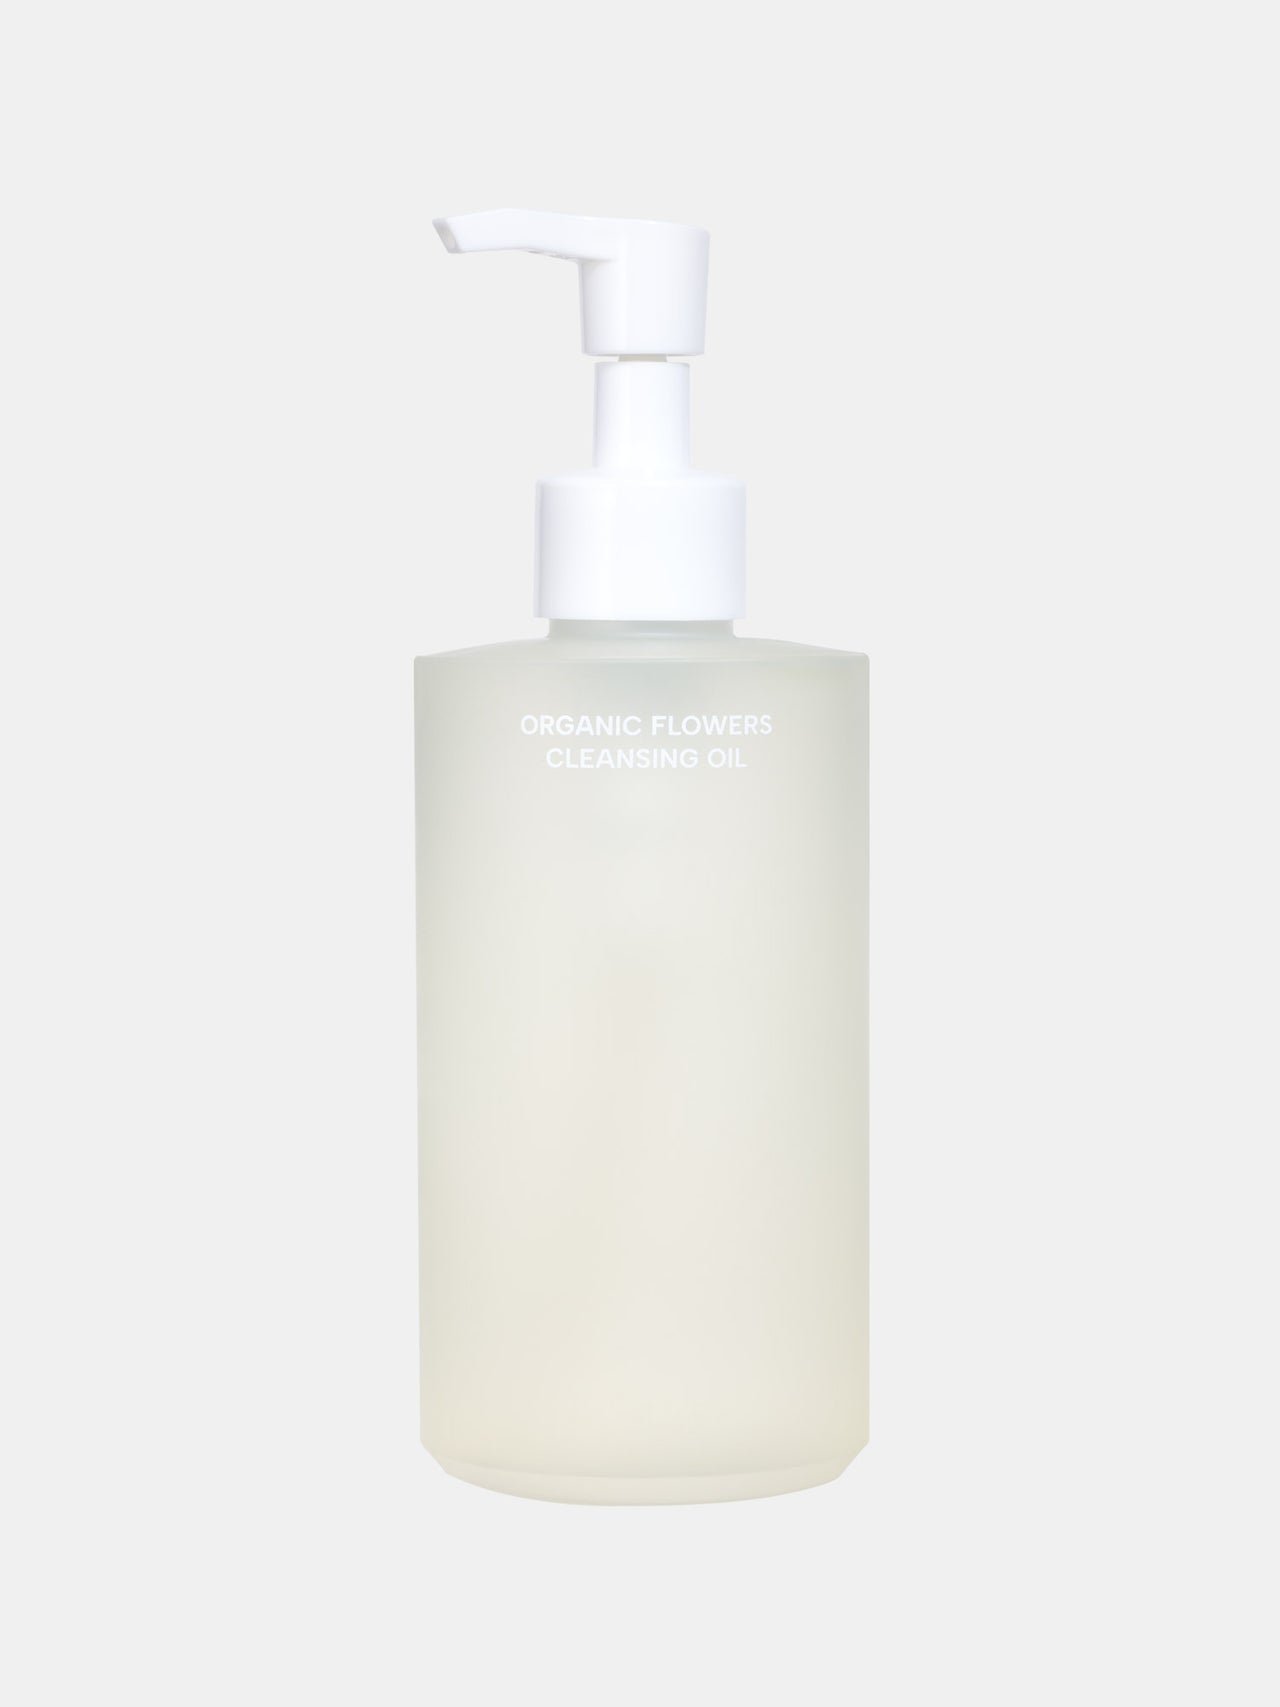 Organic Flowers Cleansing Oil